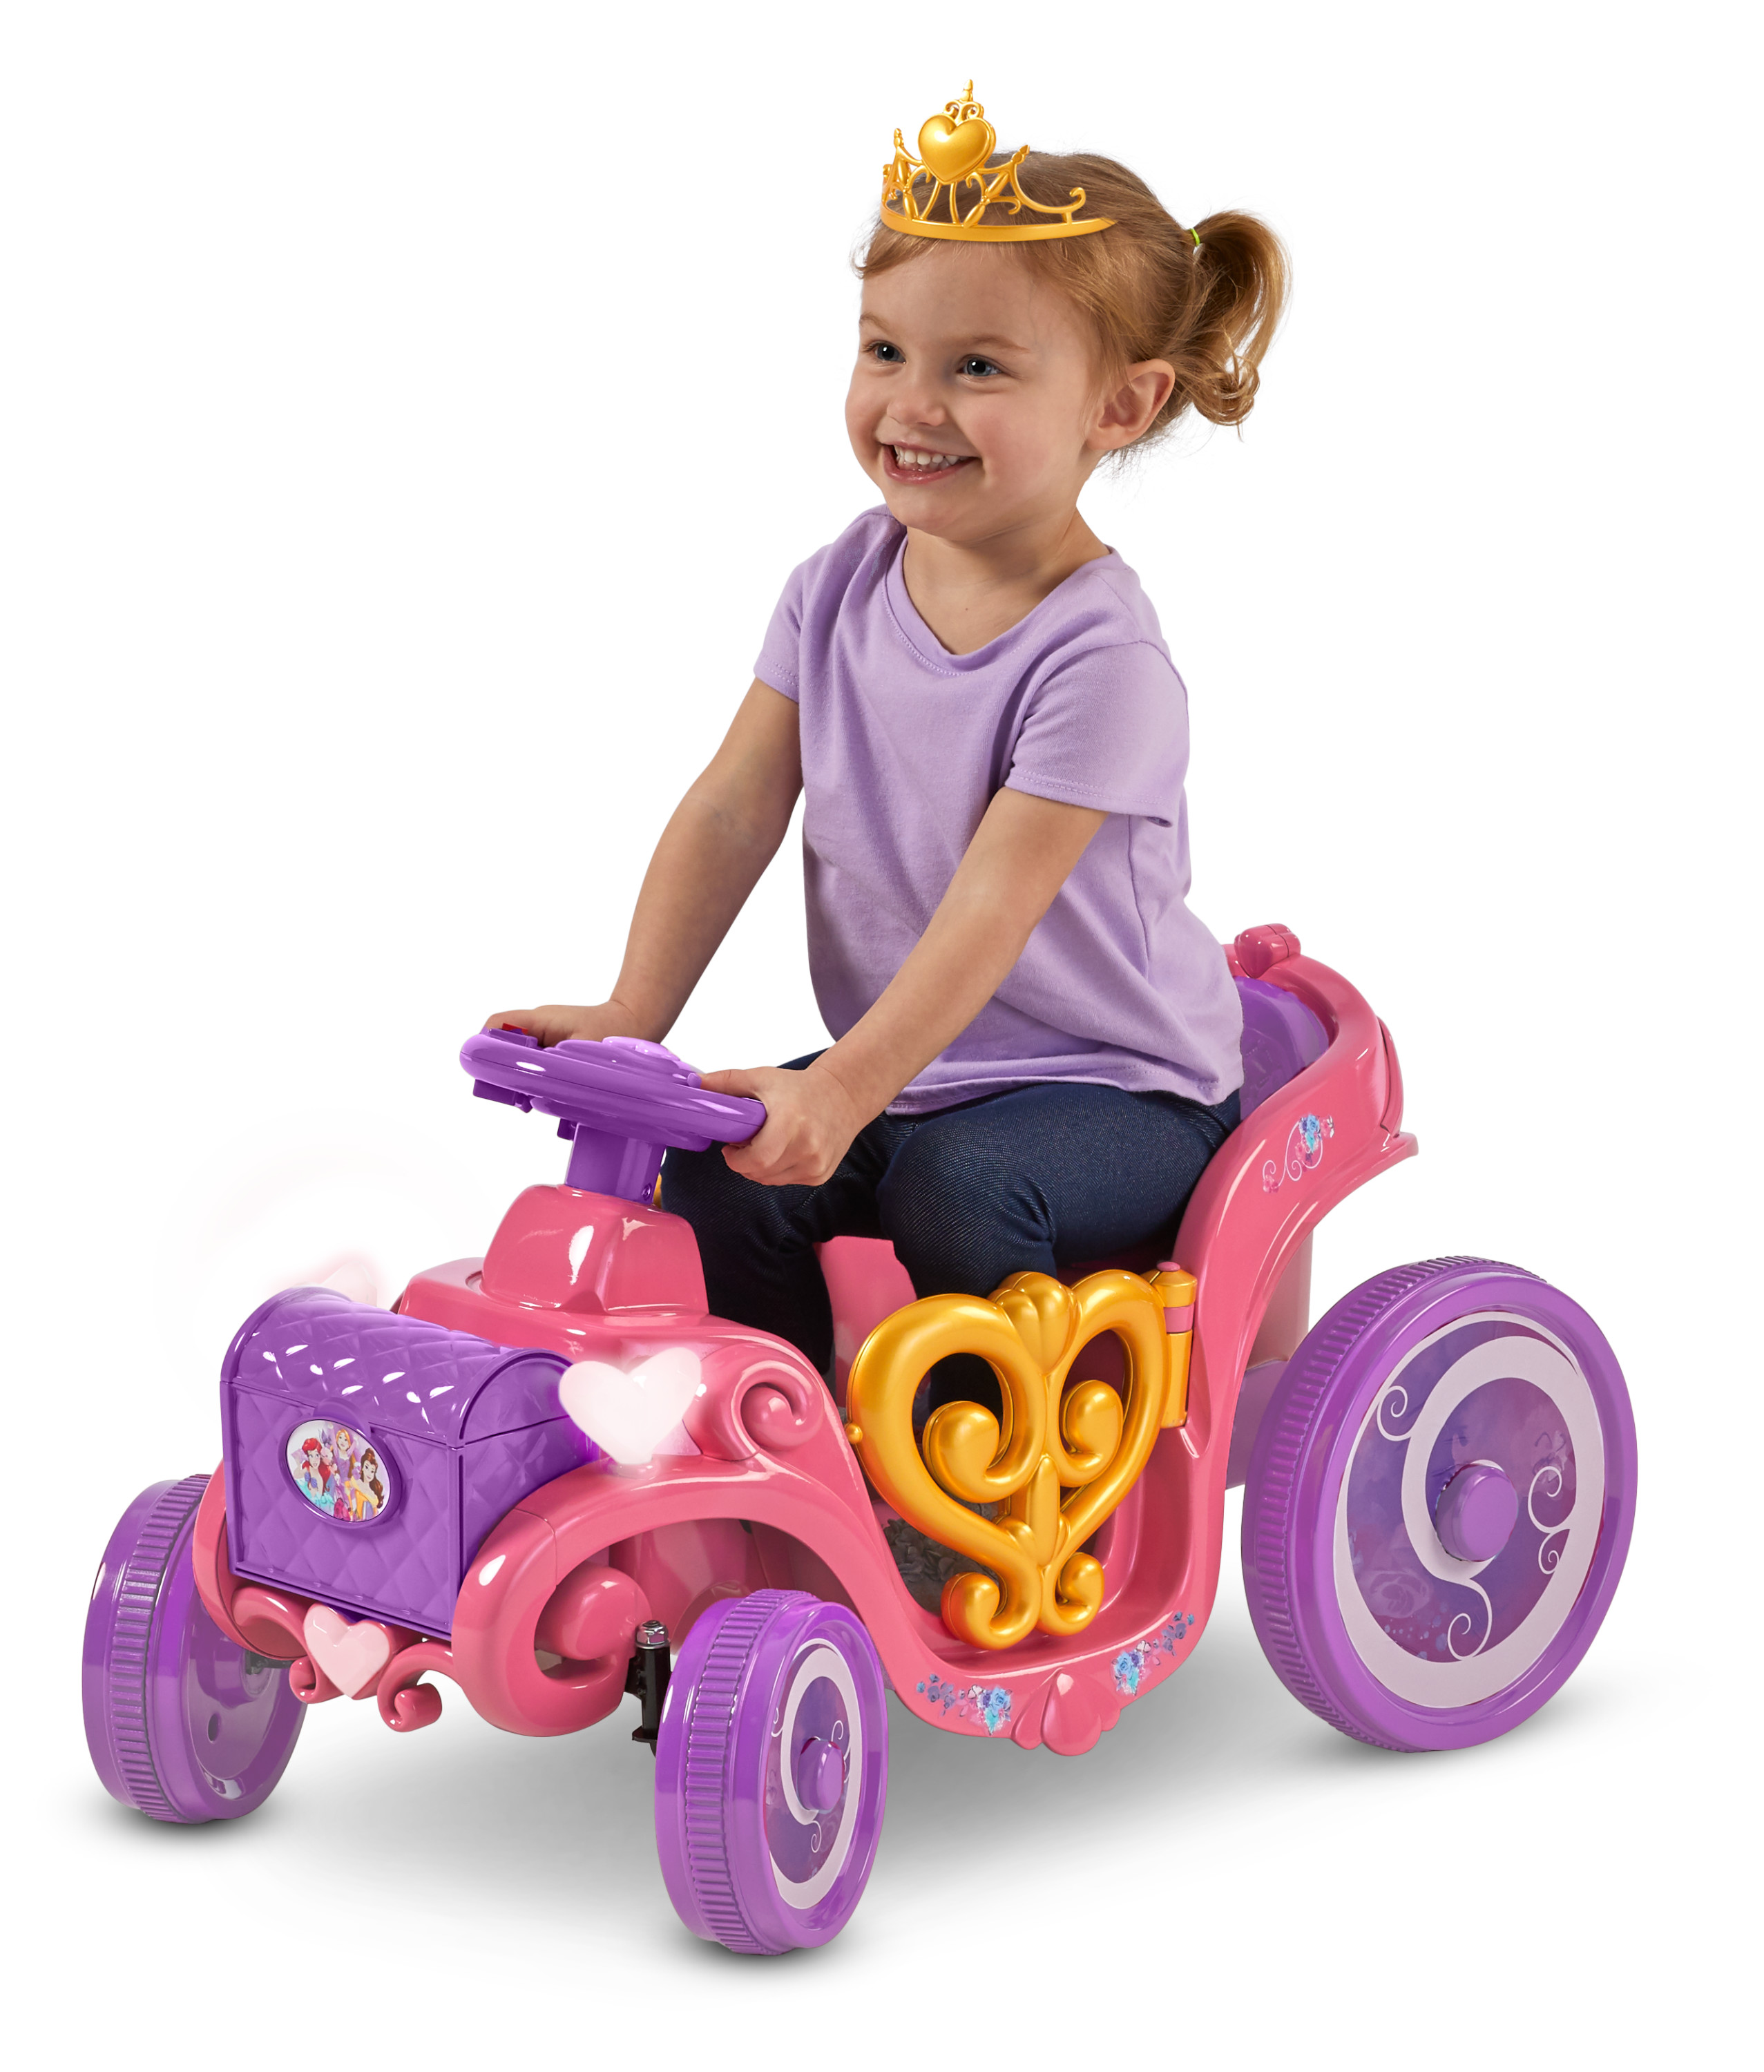 Disney Princess Enchanted Adventure Carriage Quad, 6-Volt Ride-On Toy by Kid Trax, ages 18-30 months, pink - image 1 of 8